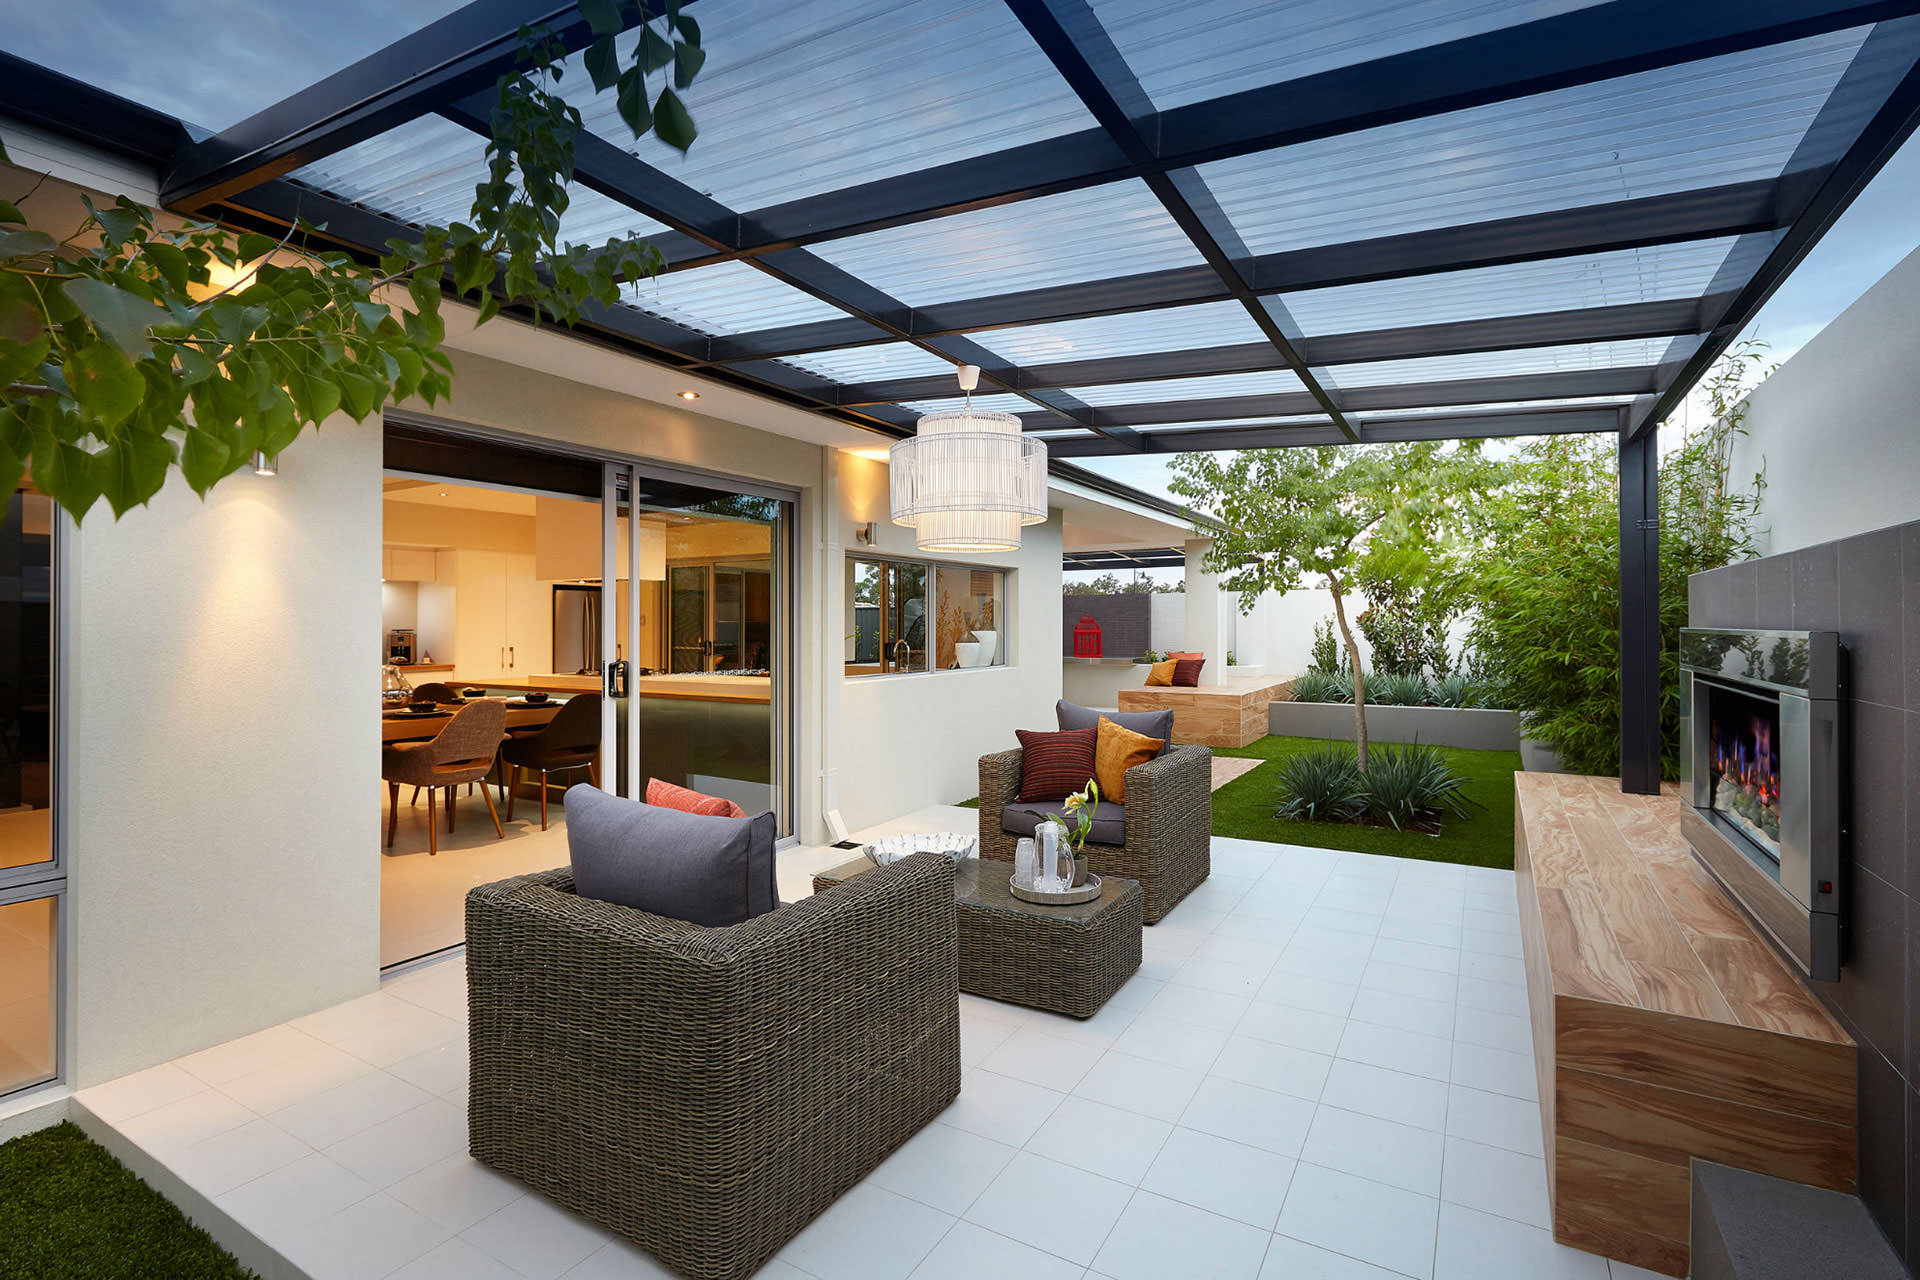 Pergola Roofing Nz Conservatory, Patio Roofing Options Nz